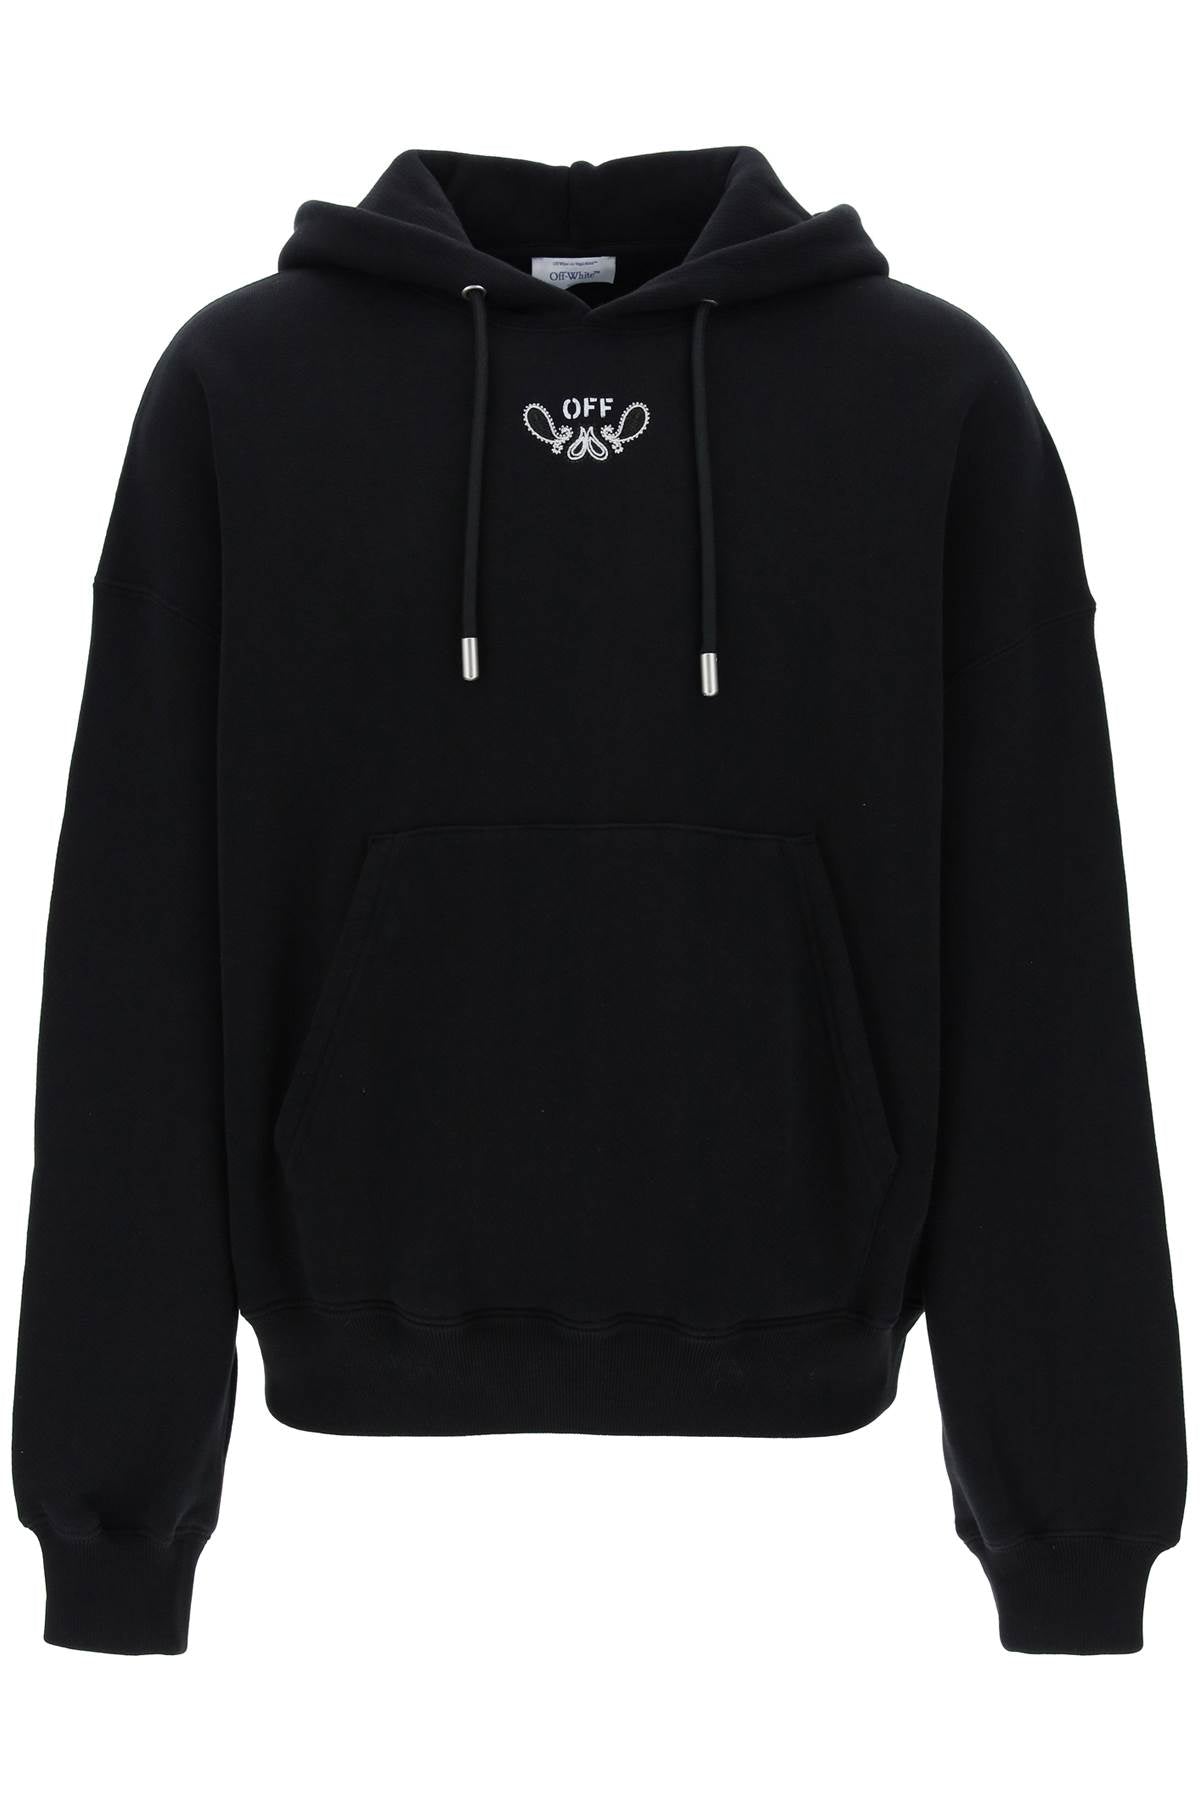 Off-white hooded sweatshirt with paisley-0